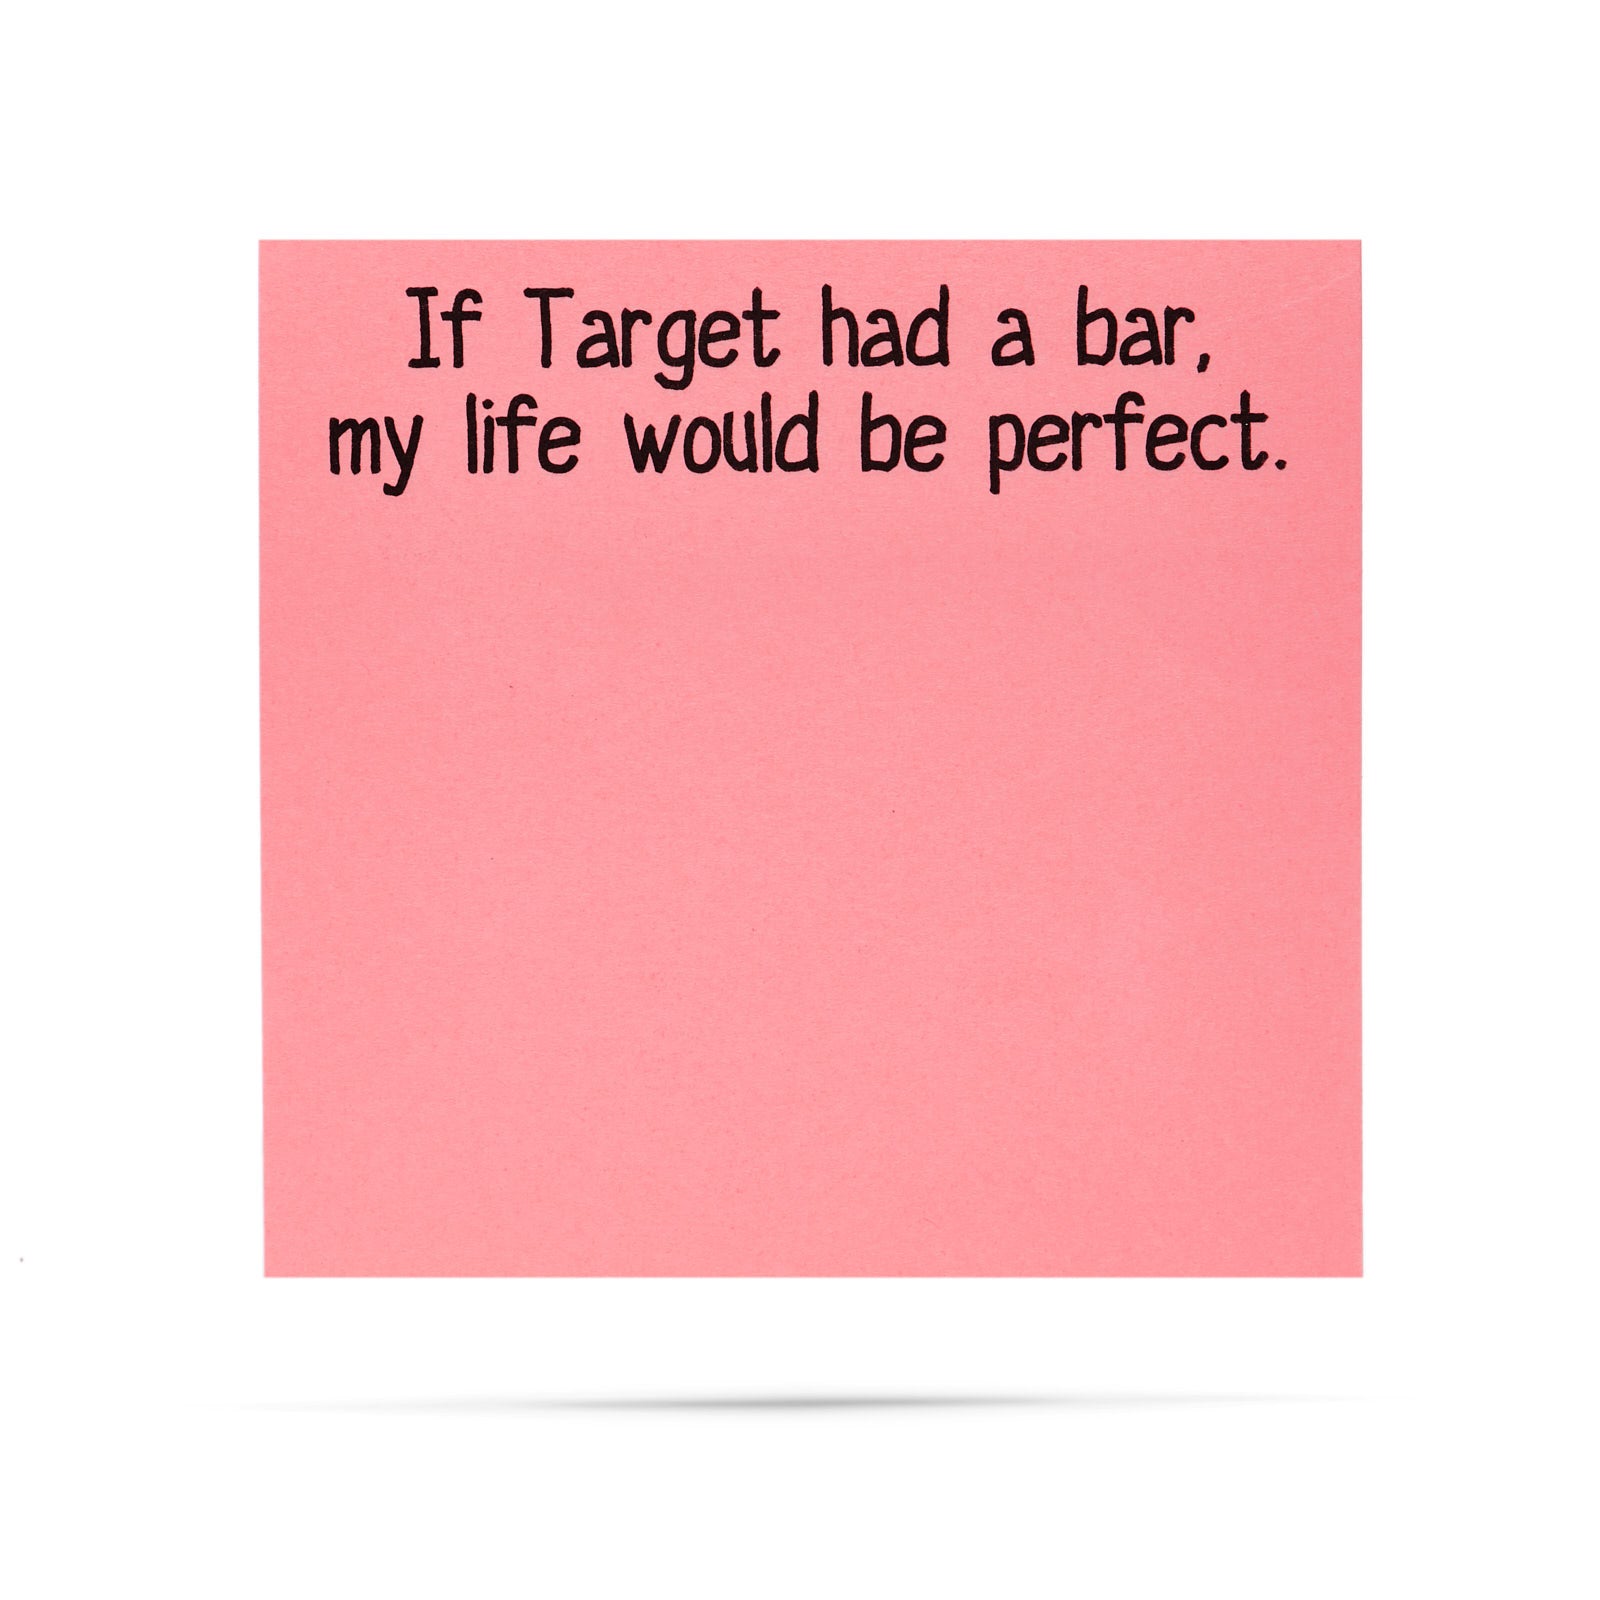 If Target had a bar, my life would be perfect 100 sheet sticky note pad